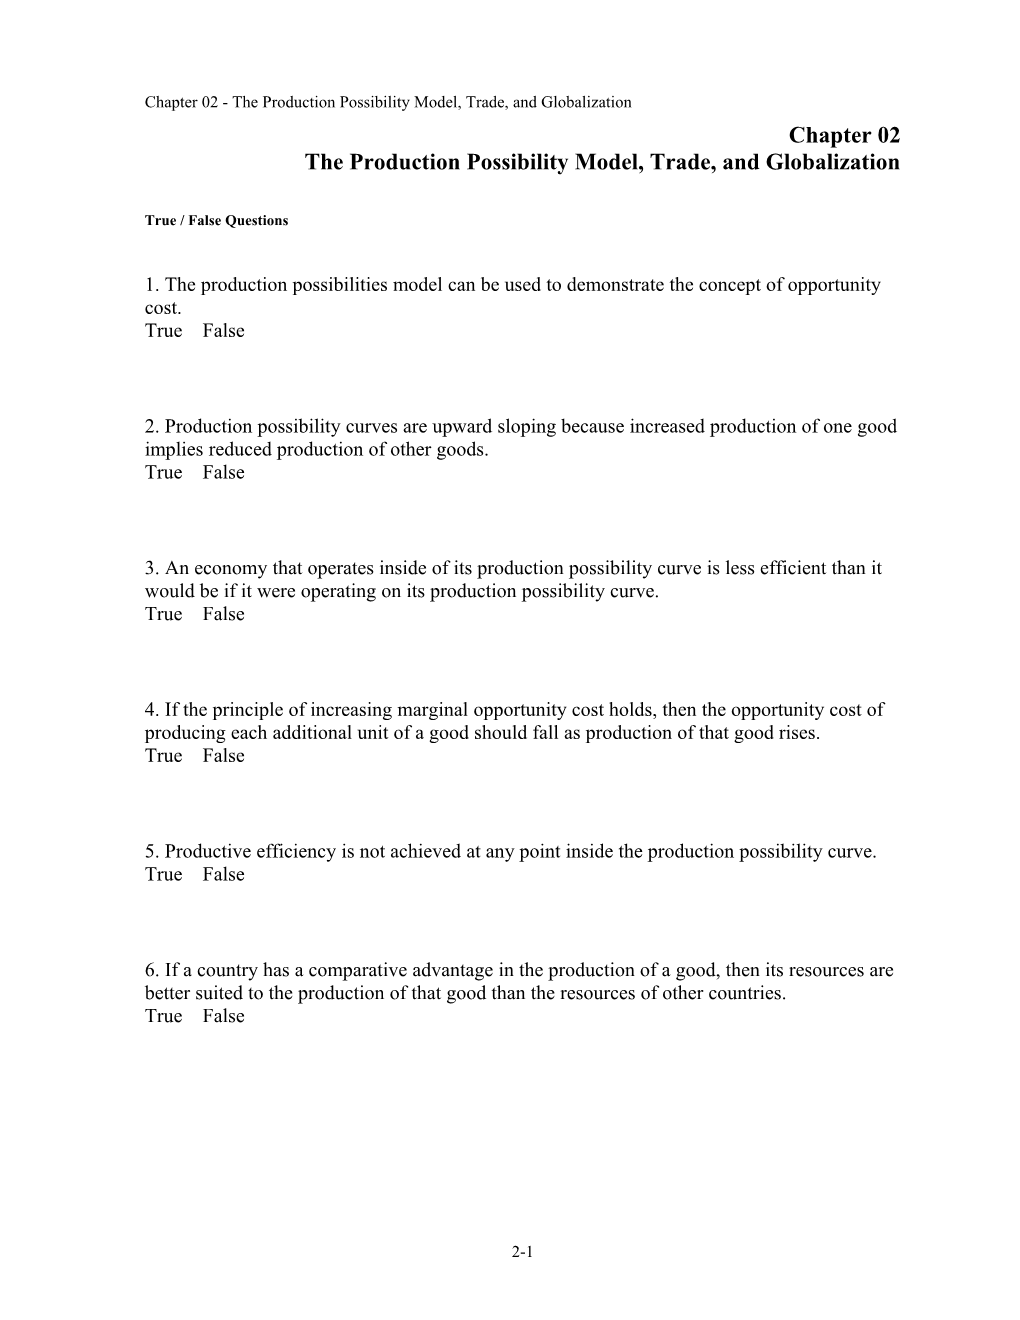 Chapter 02 the Production Possibility Model, Trade, and Globalization